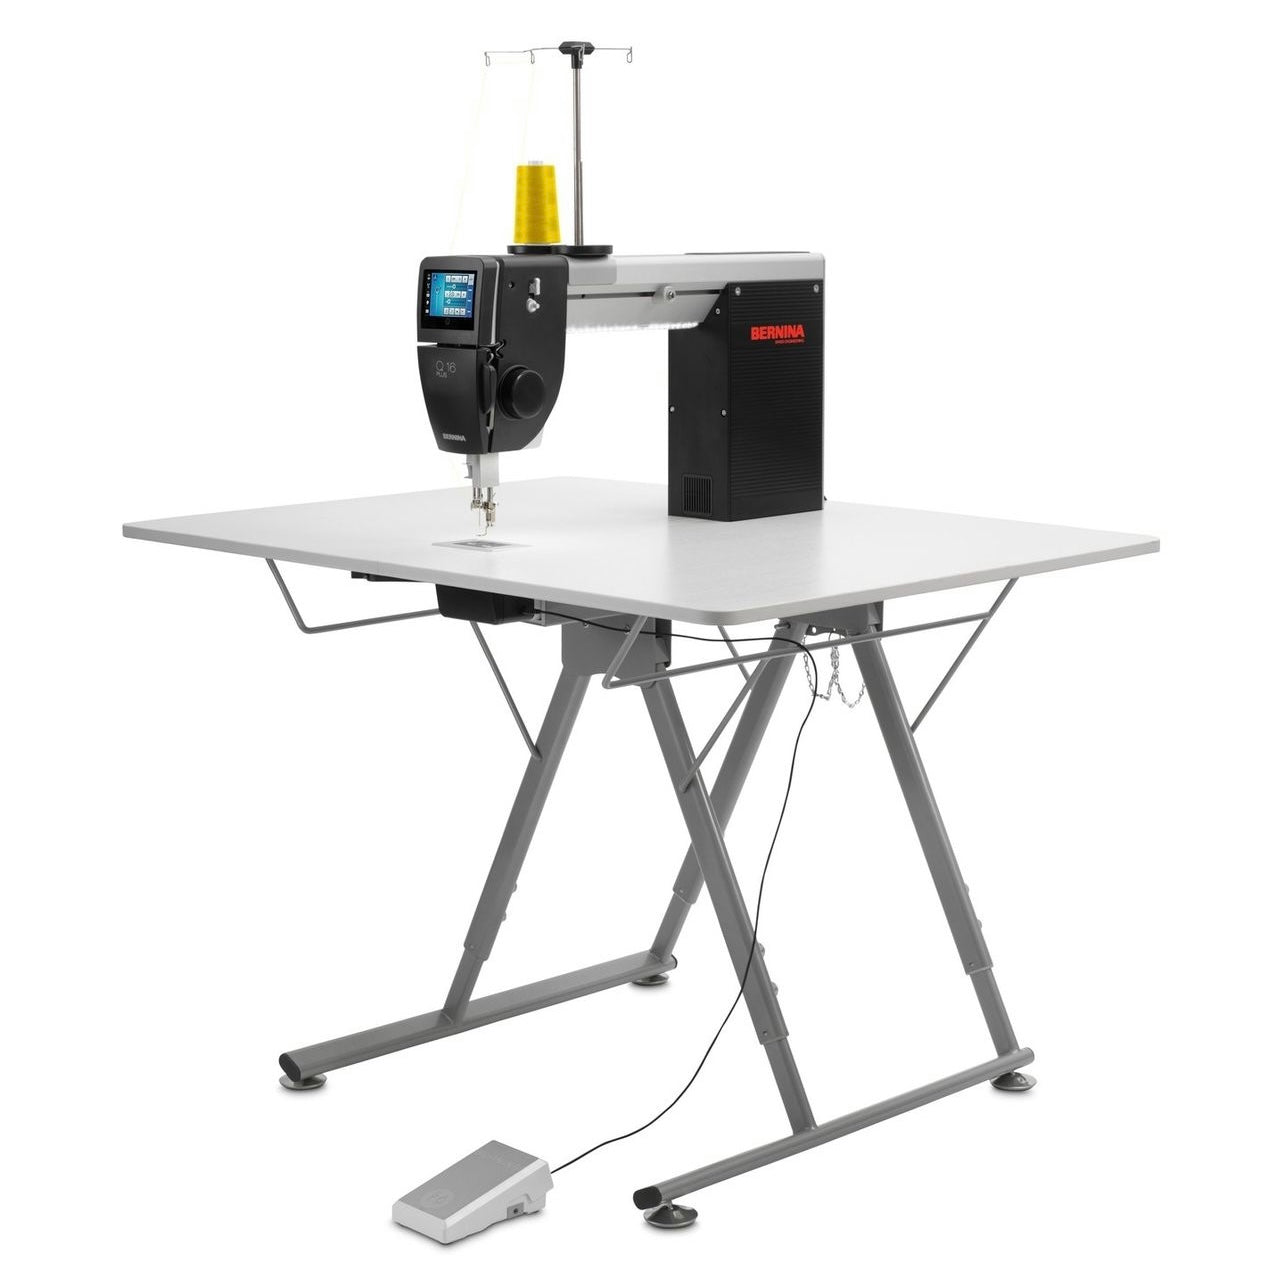 Bernina Q16 Plus with foldable table  Your BIG DAY Sale (Local Delivery ONLY)